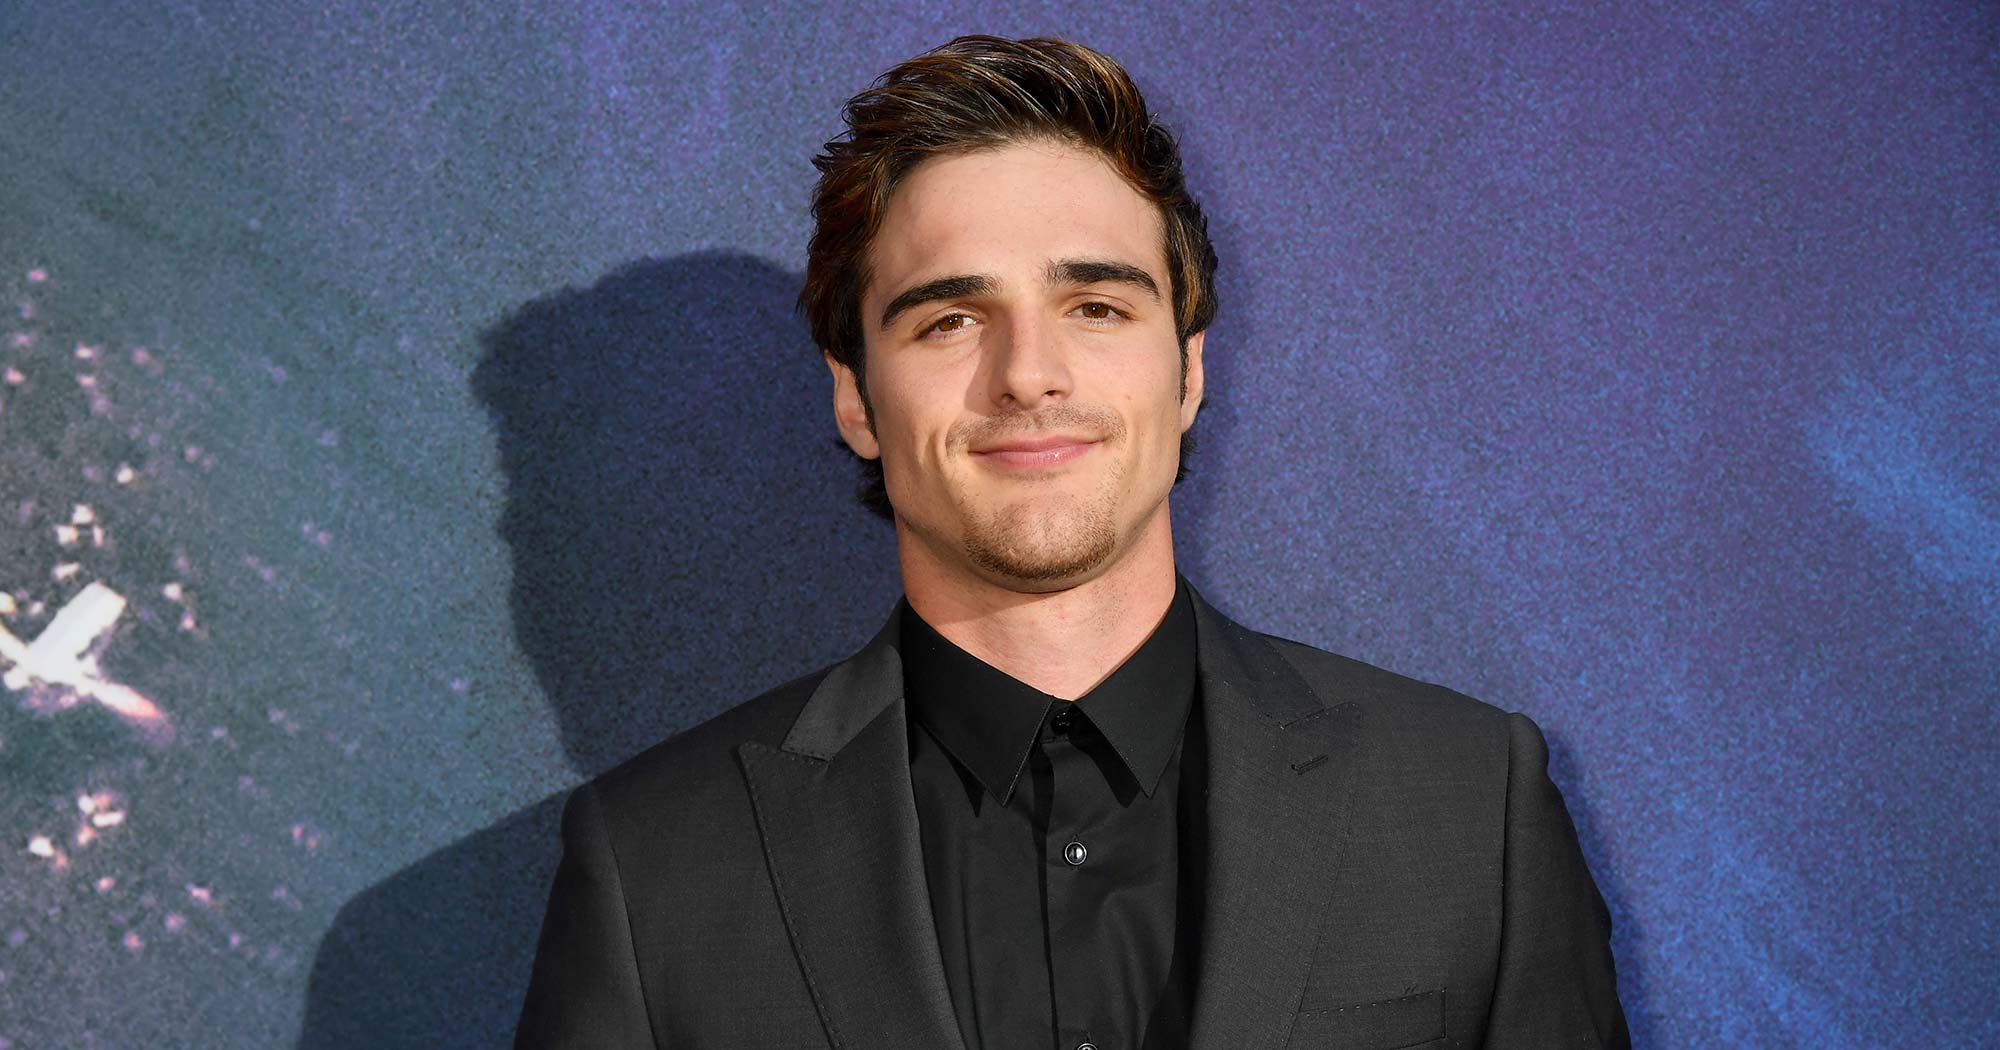 Jacob Elordi Talks Body Image & The Kissing Booth